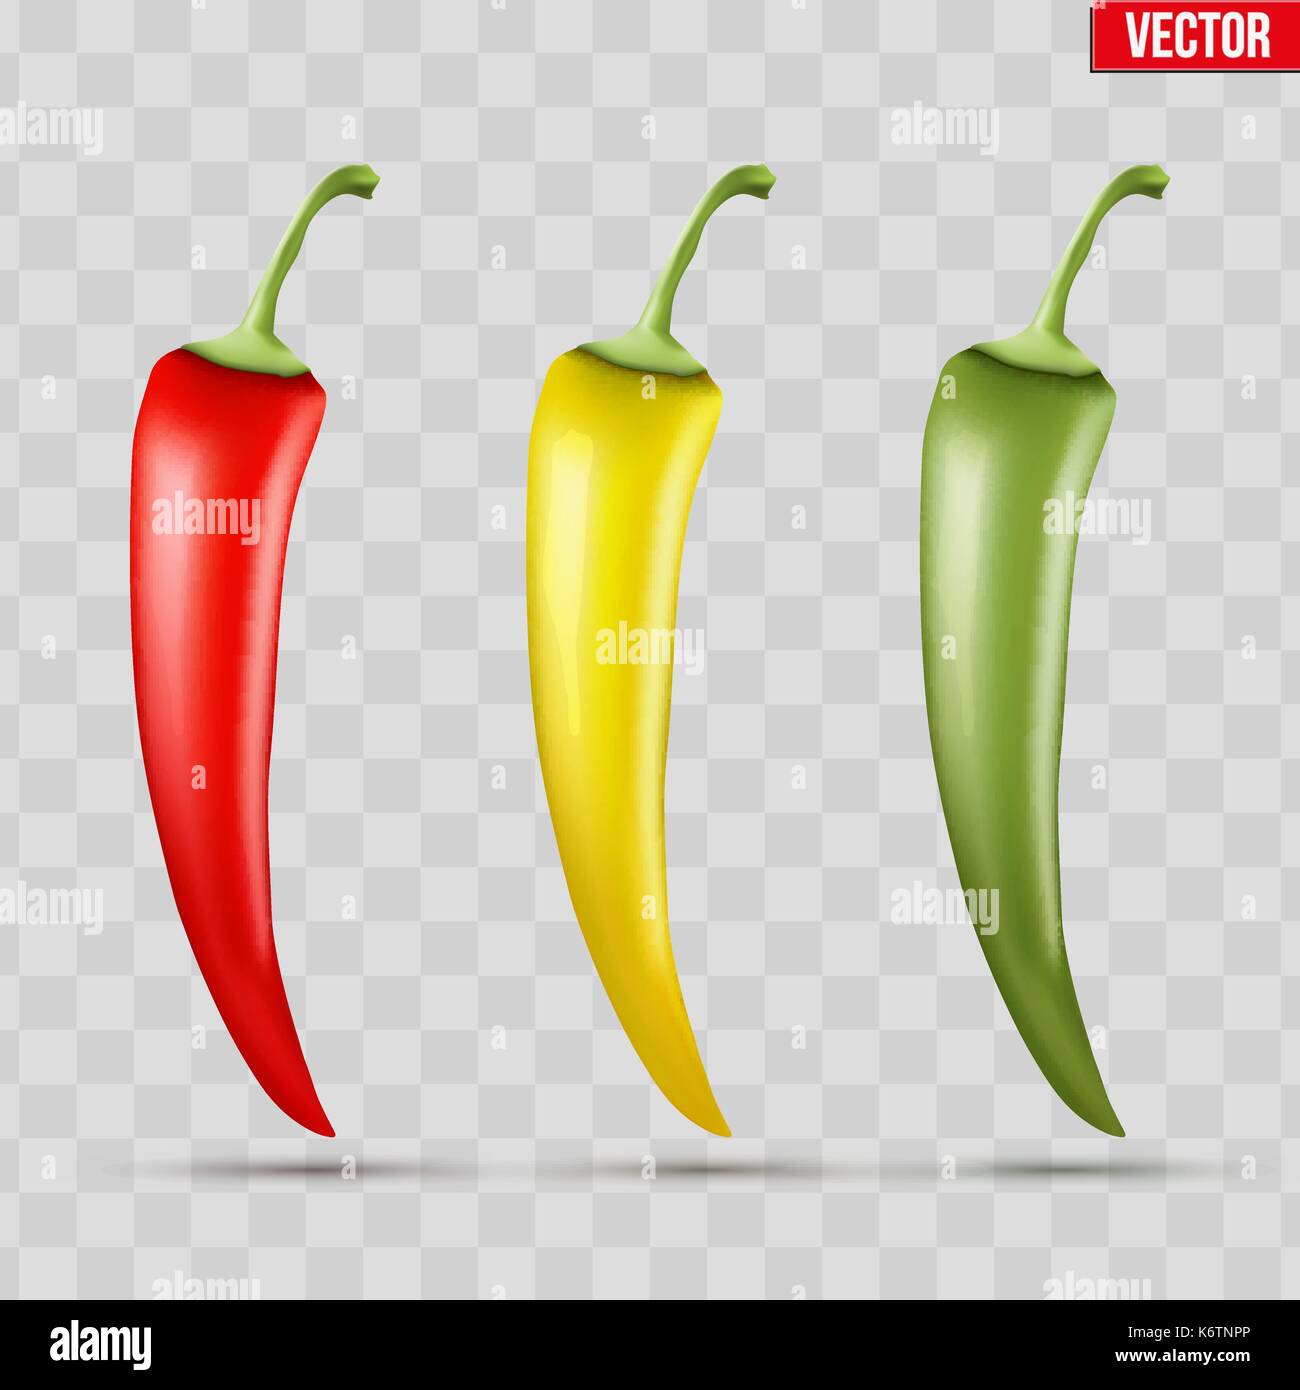 Set of hot chili peppers Stock Vector